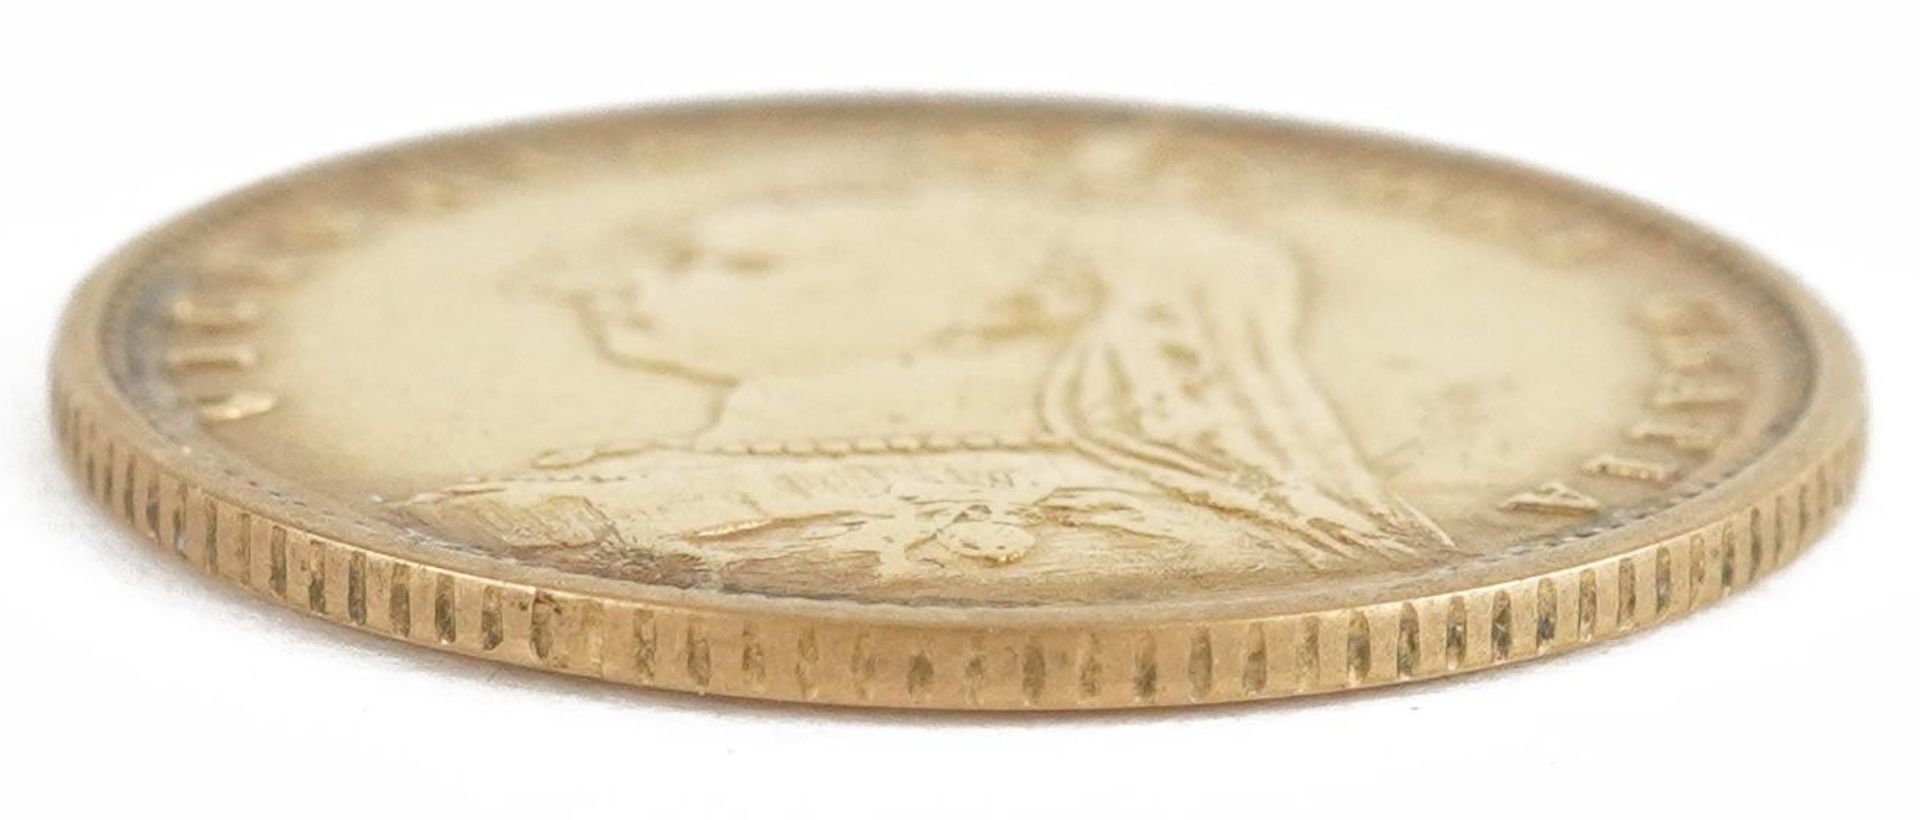 Queen Victoria 1892 shield back gold half sovereign : For further information on this lot please - Image 3 of 3